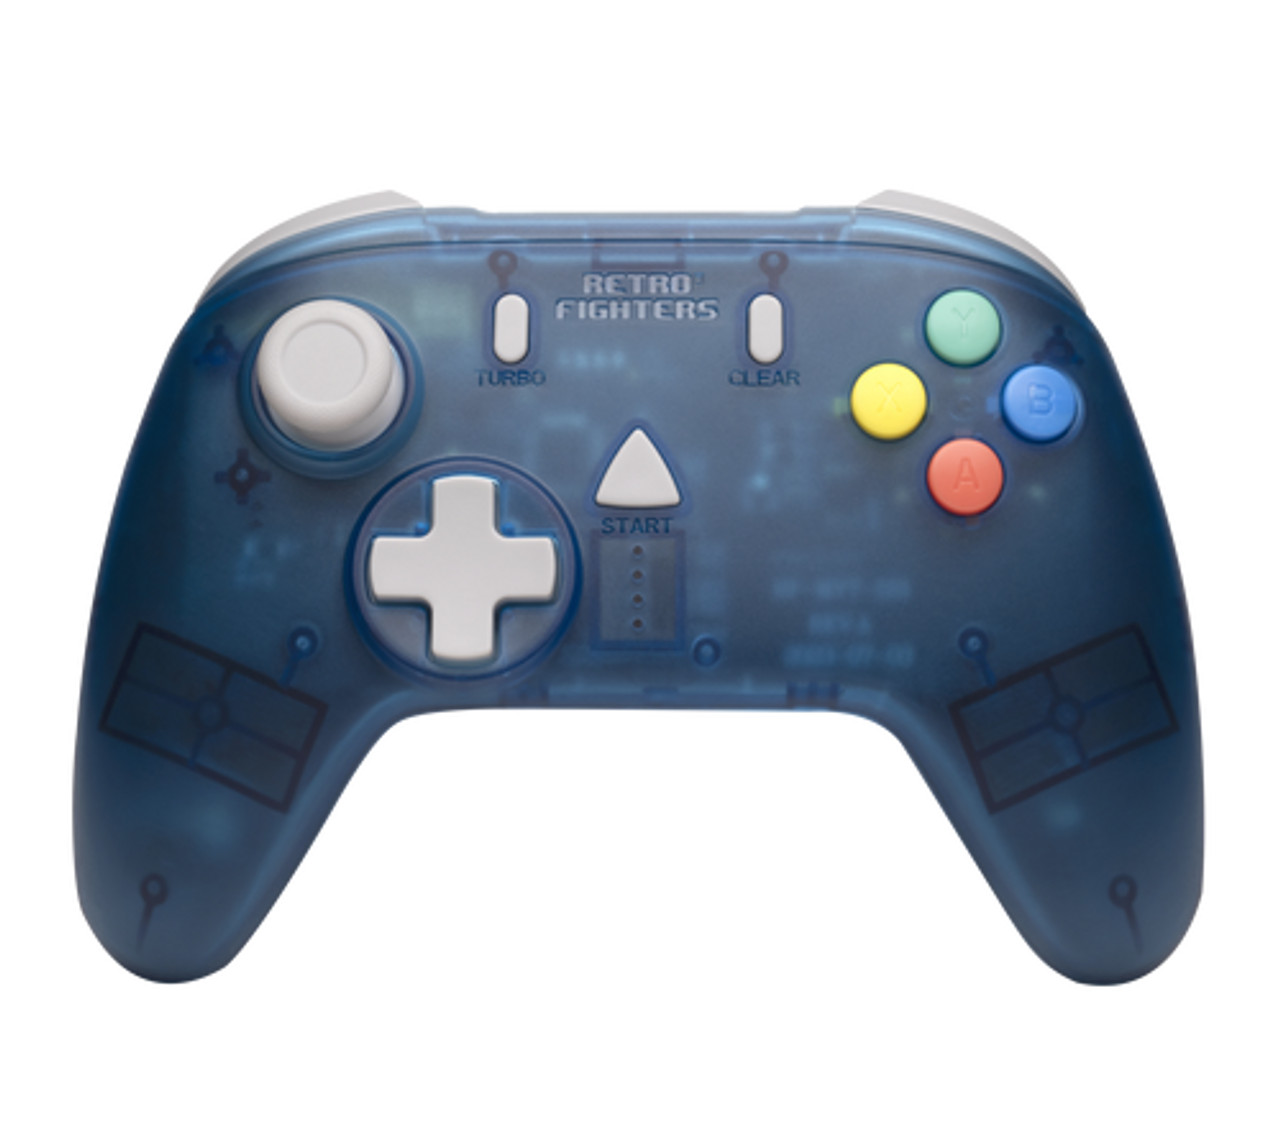 A SEGA Dreamcast Controller With A Built-in Screen